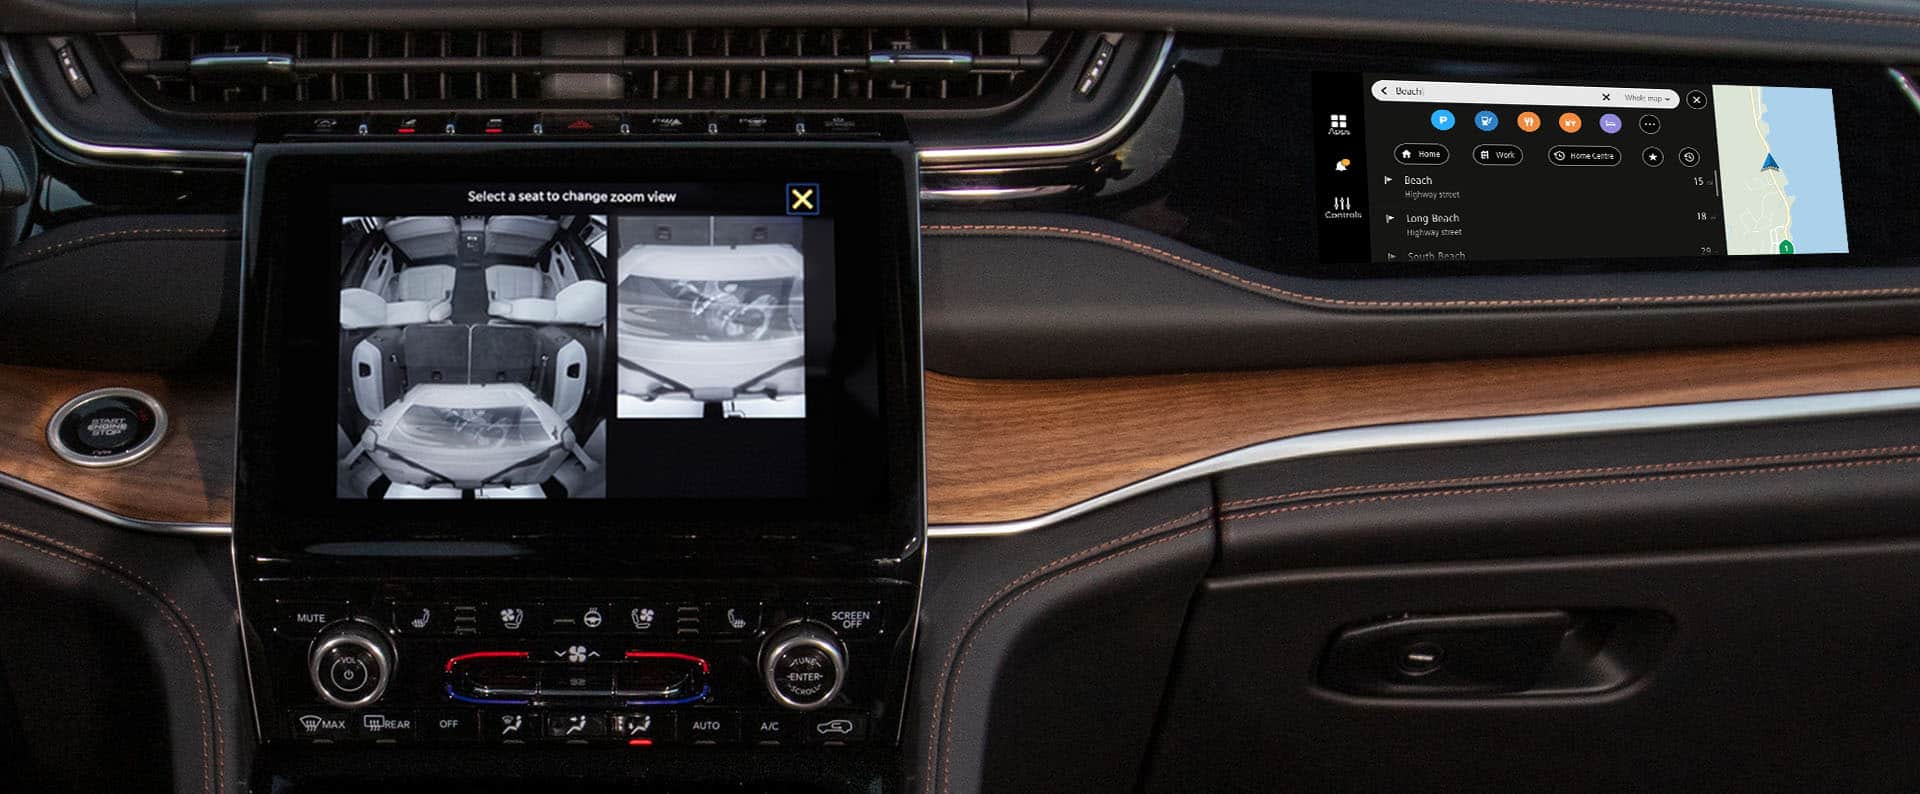 The touchscreen in the 2023 Jeep Grand Cherokee with several views from the interior rear seat monitoring camera to select from.